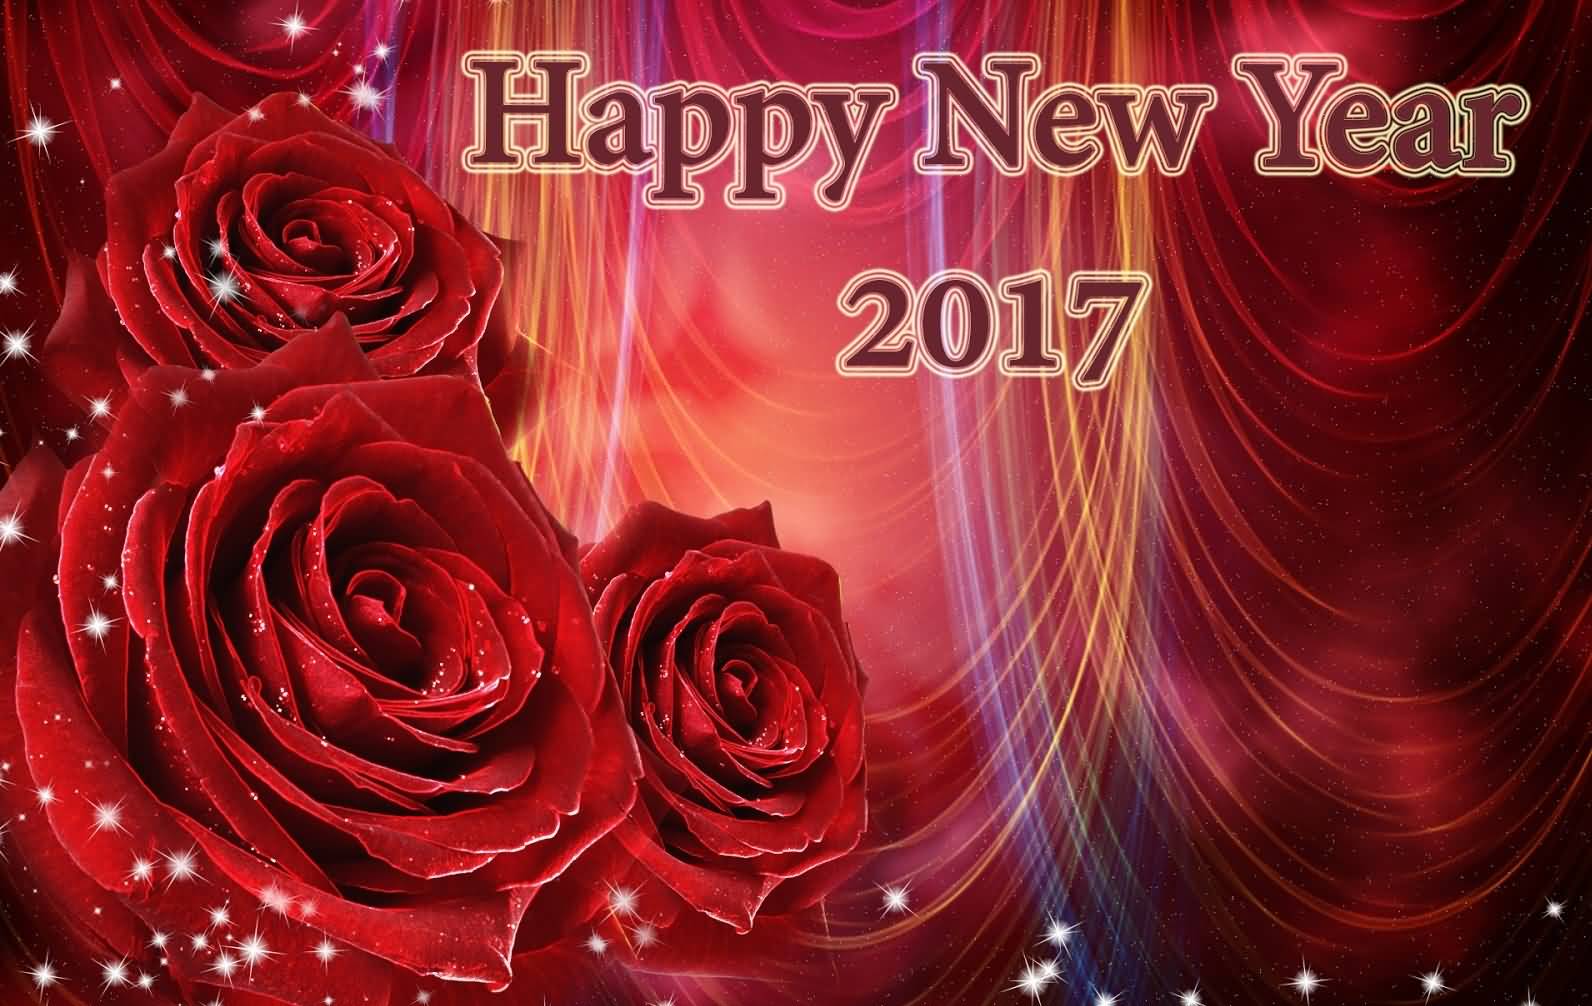 Happy New Year 2017 Rose Flowers Picture